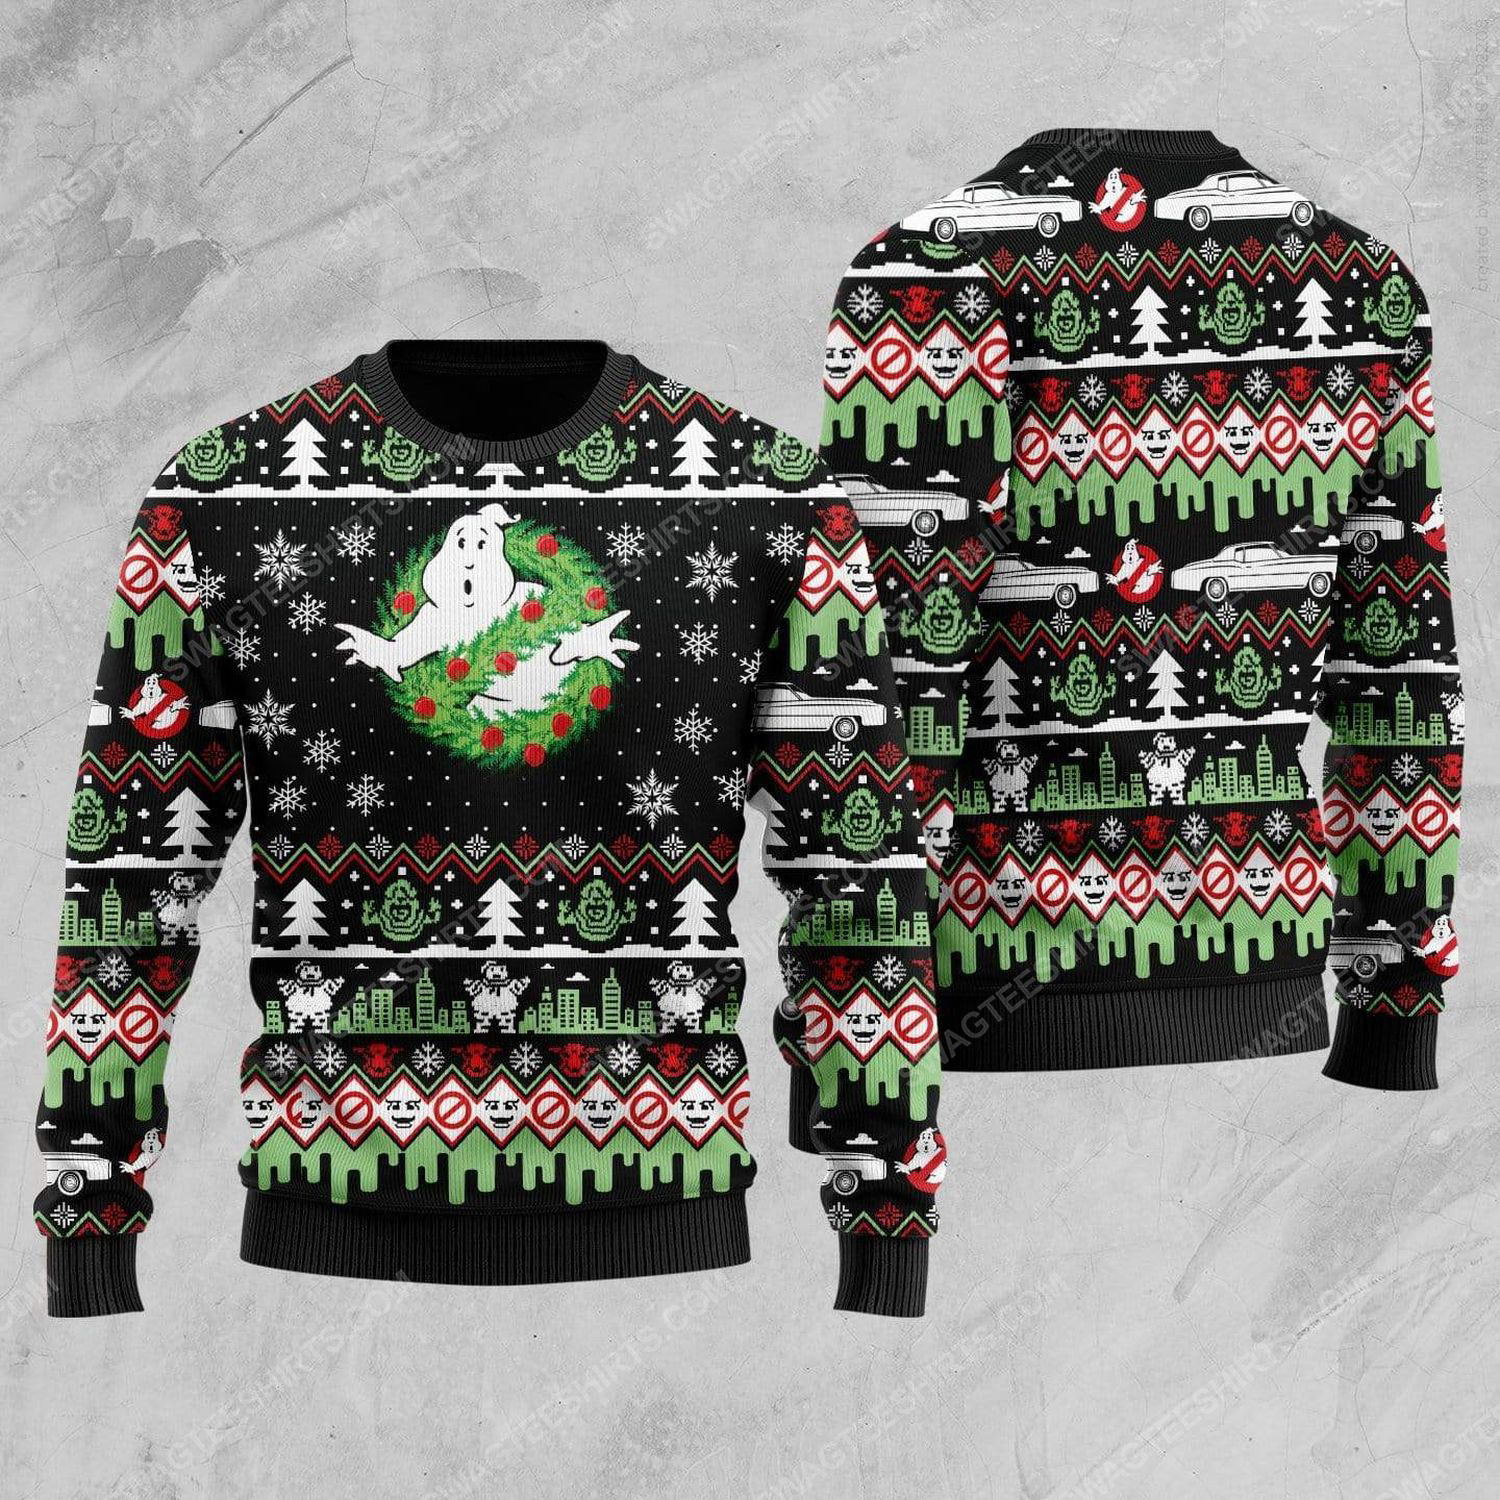 Ghostbusters movie all over print ugly christmas sweater 2 - Copy